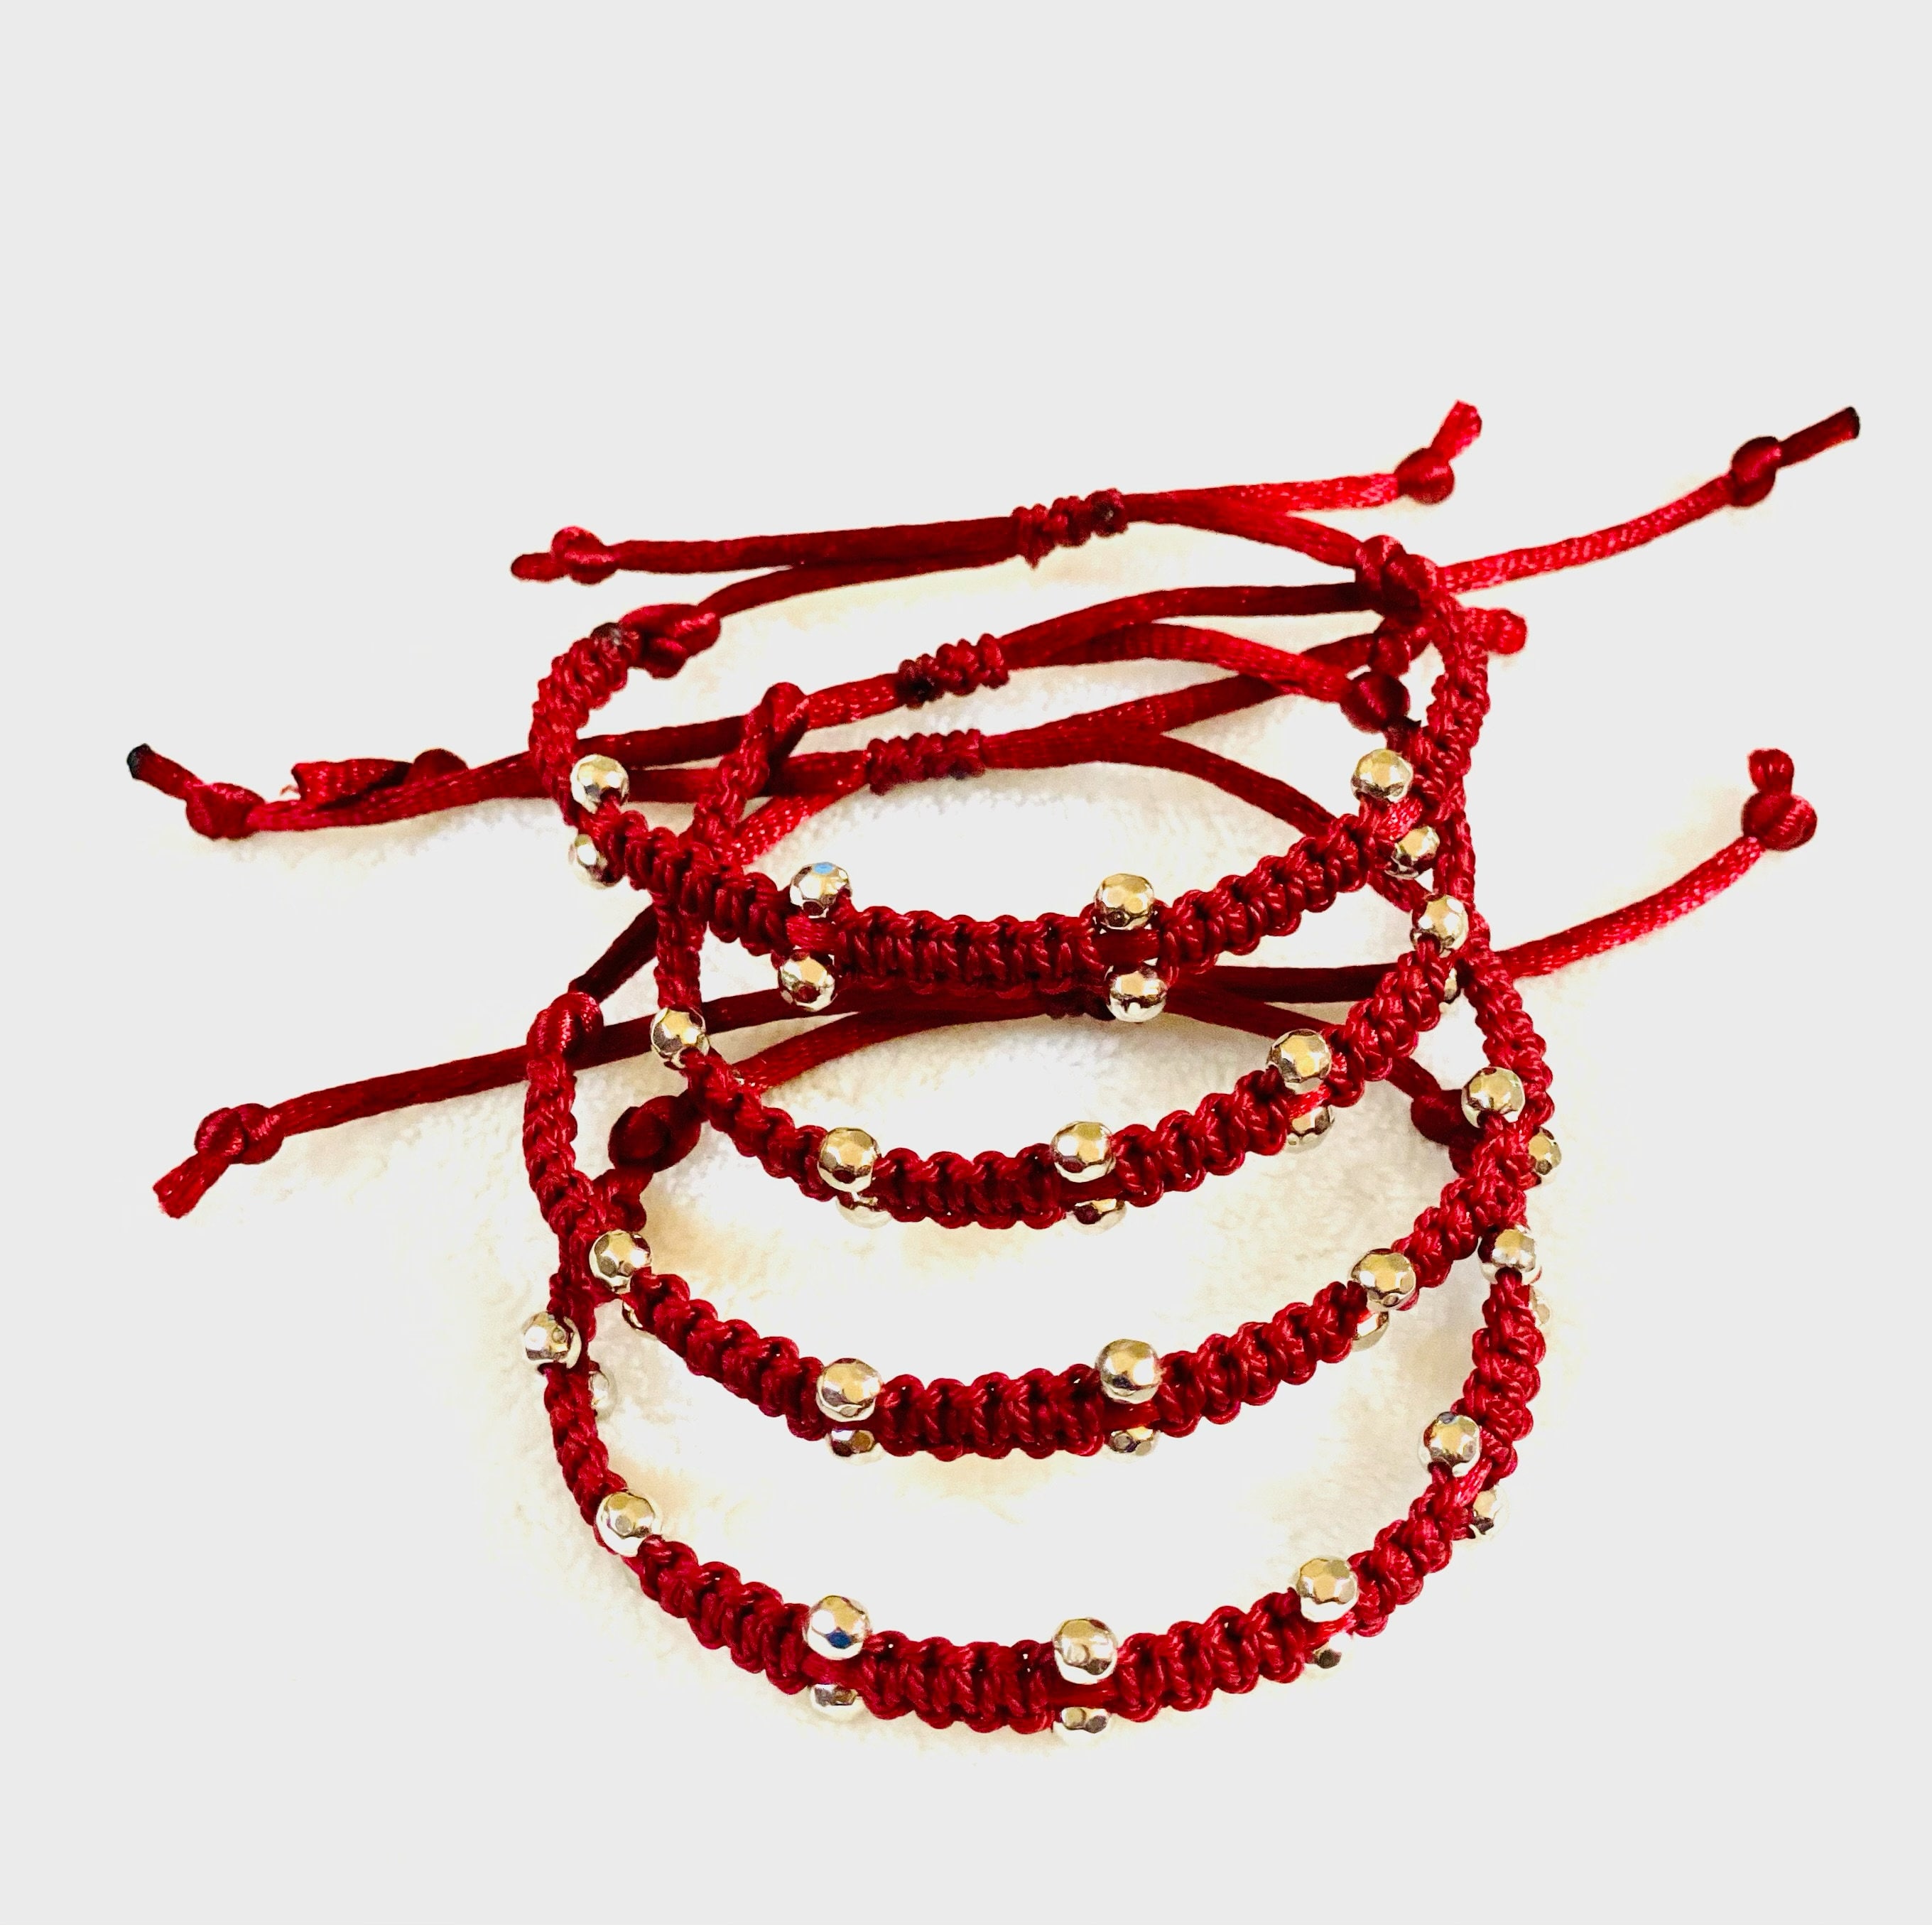 Thread Bracelet in Burgundy Color With Rice Beads. 